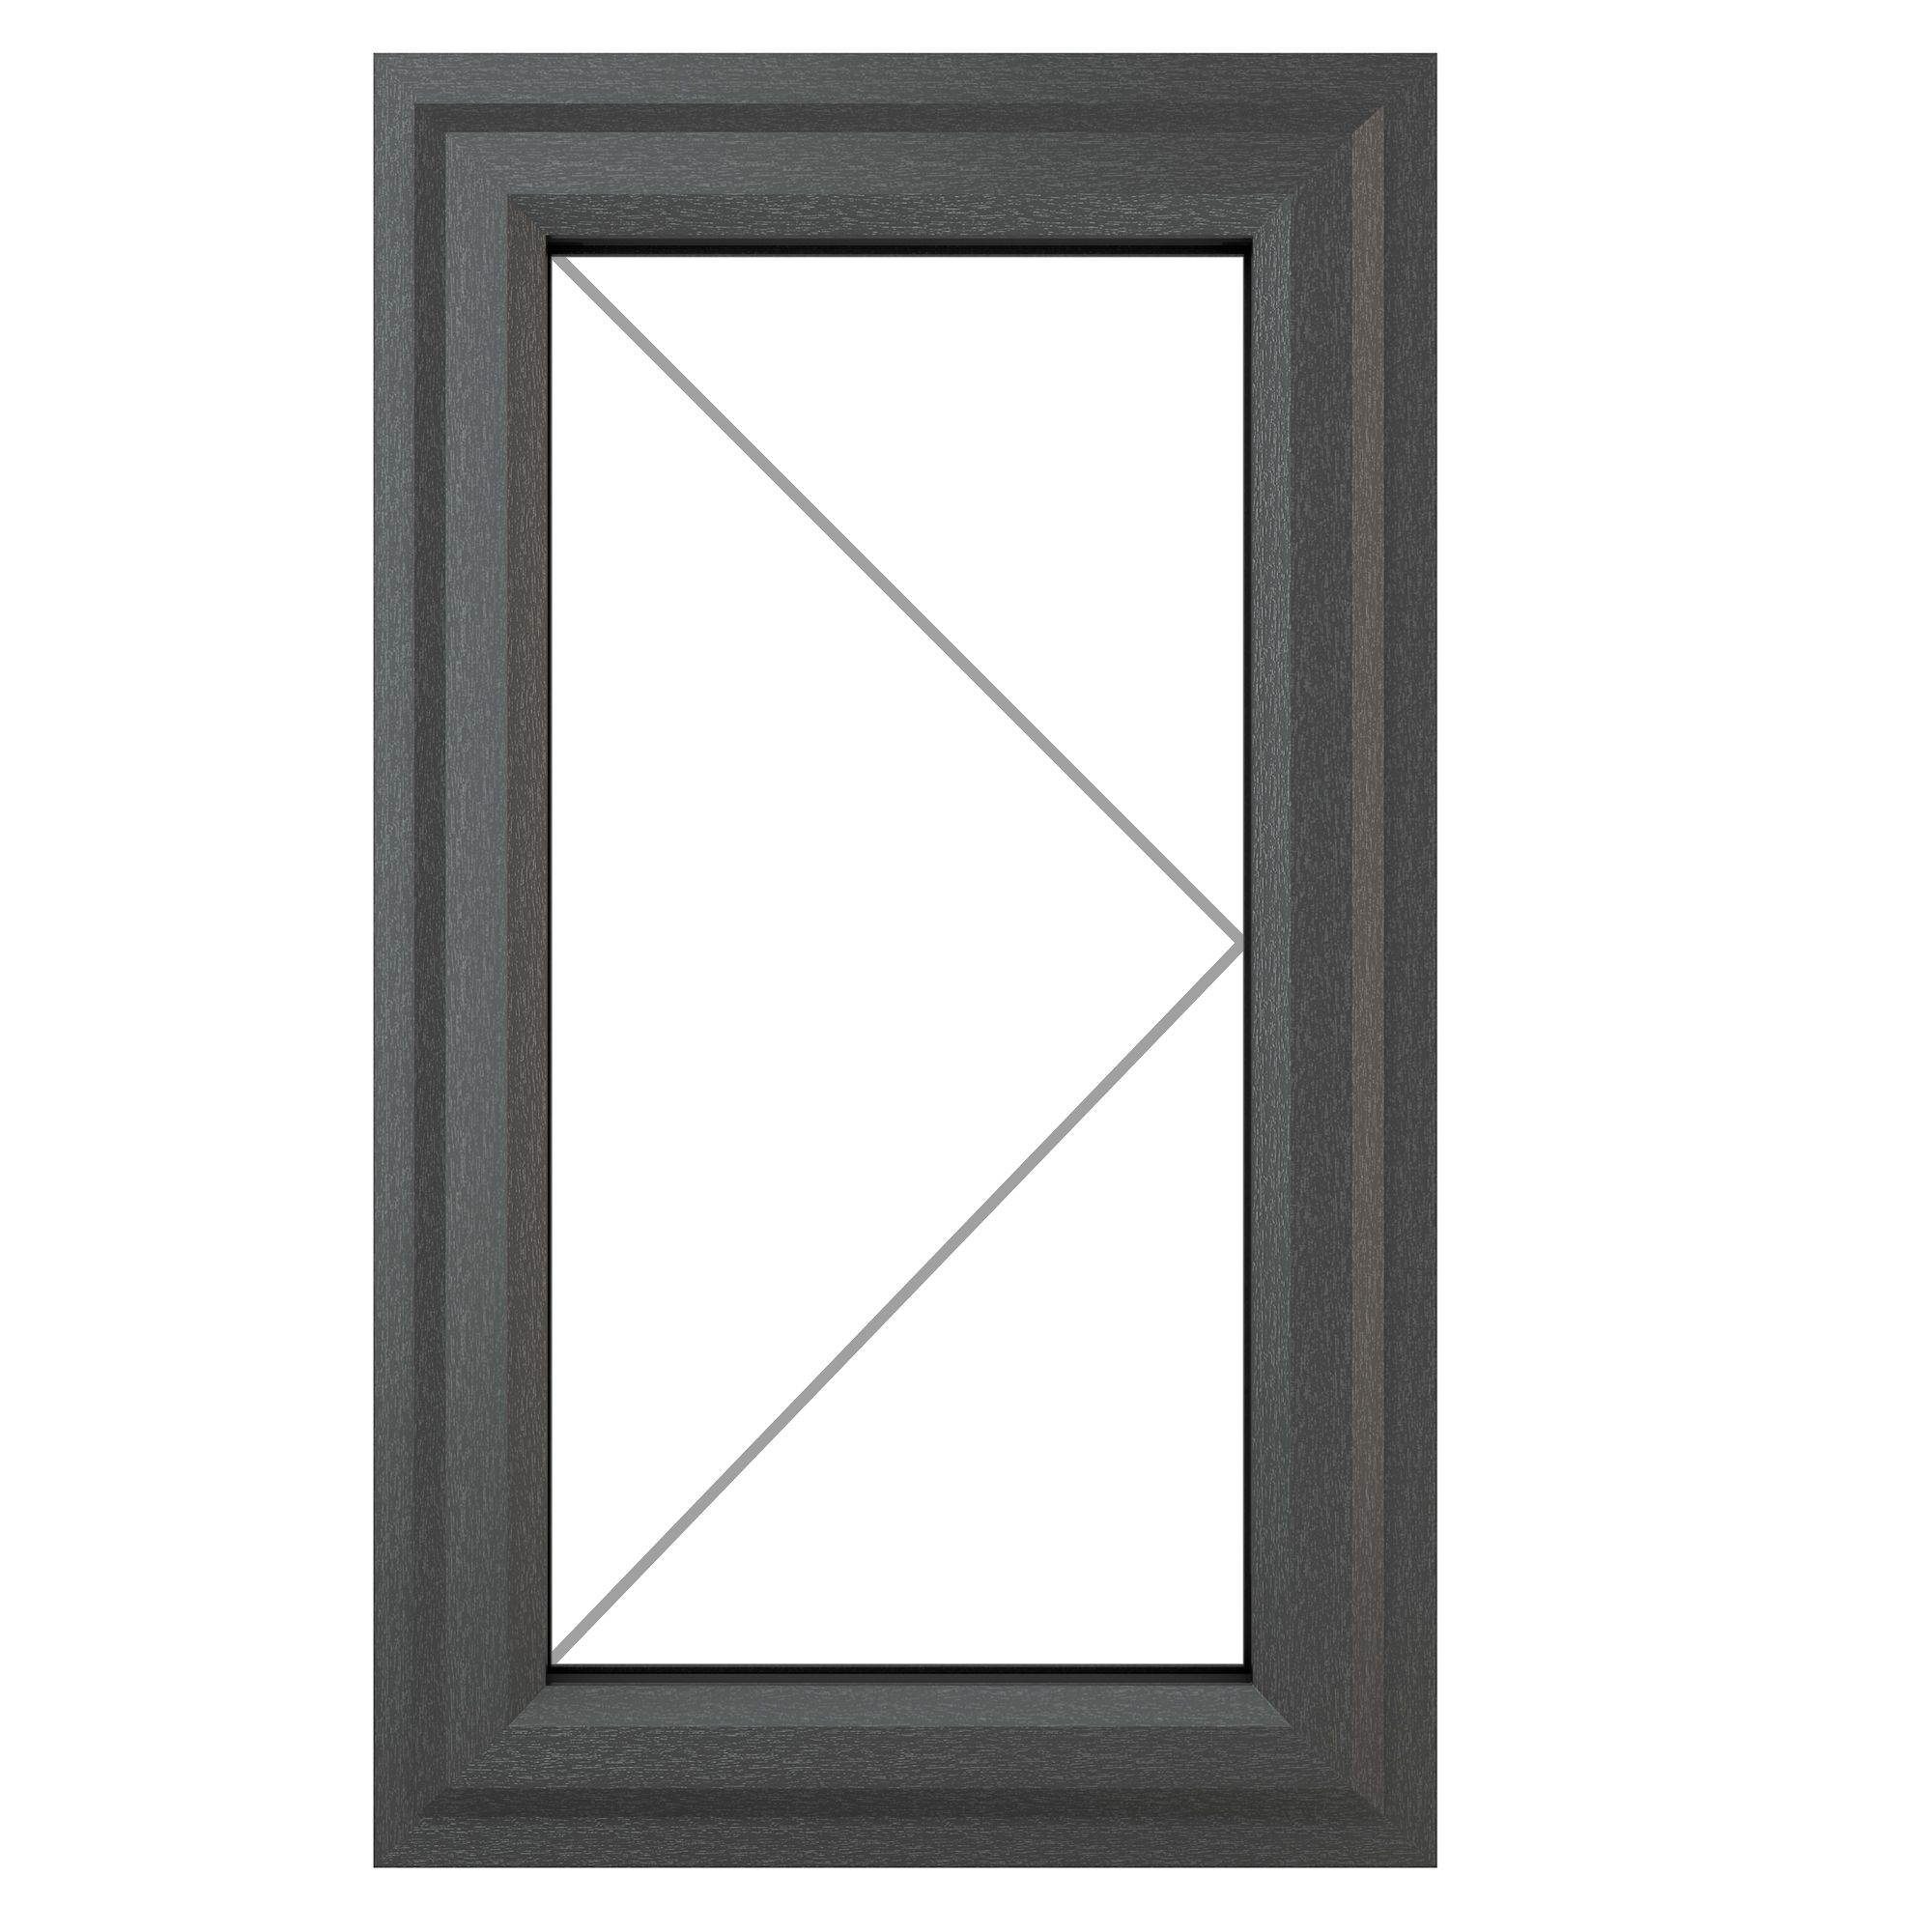 Fortia 1P Clear Glazed Anthracite uPVC Right-handed Swinging Window, (H)965mm (W)610mm